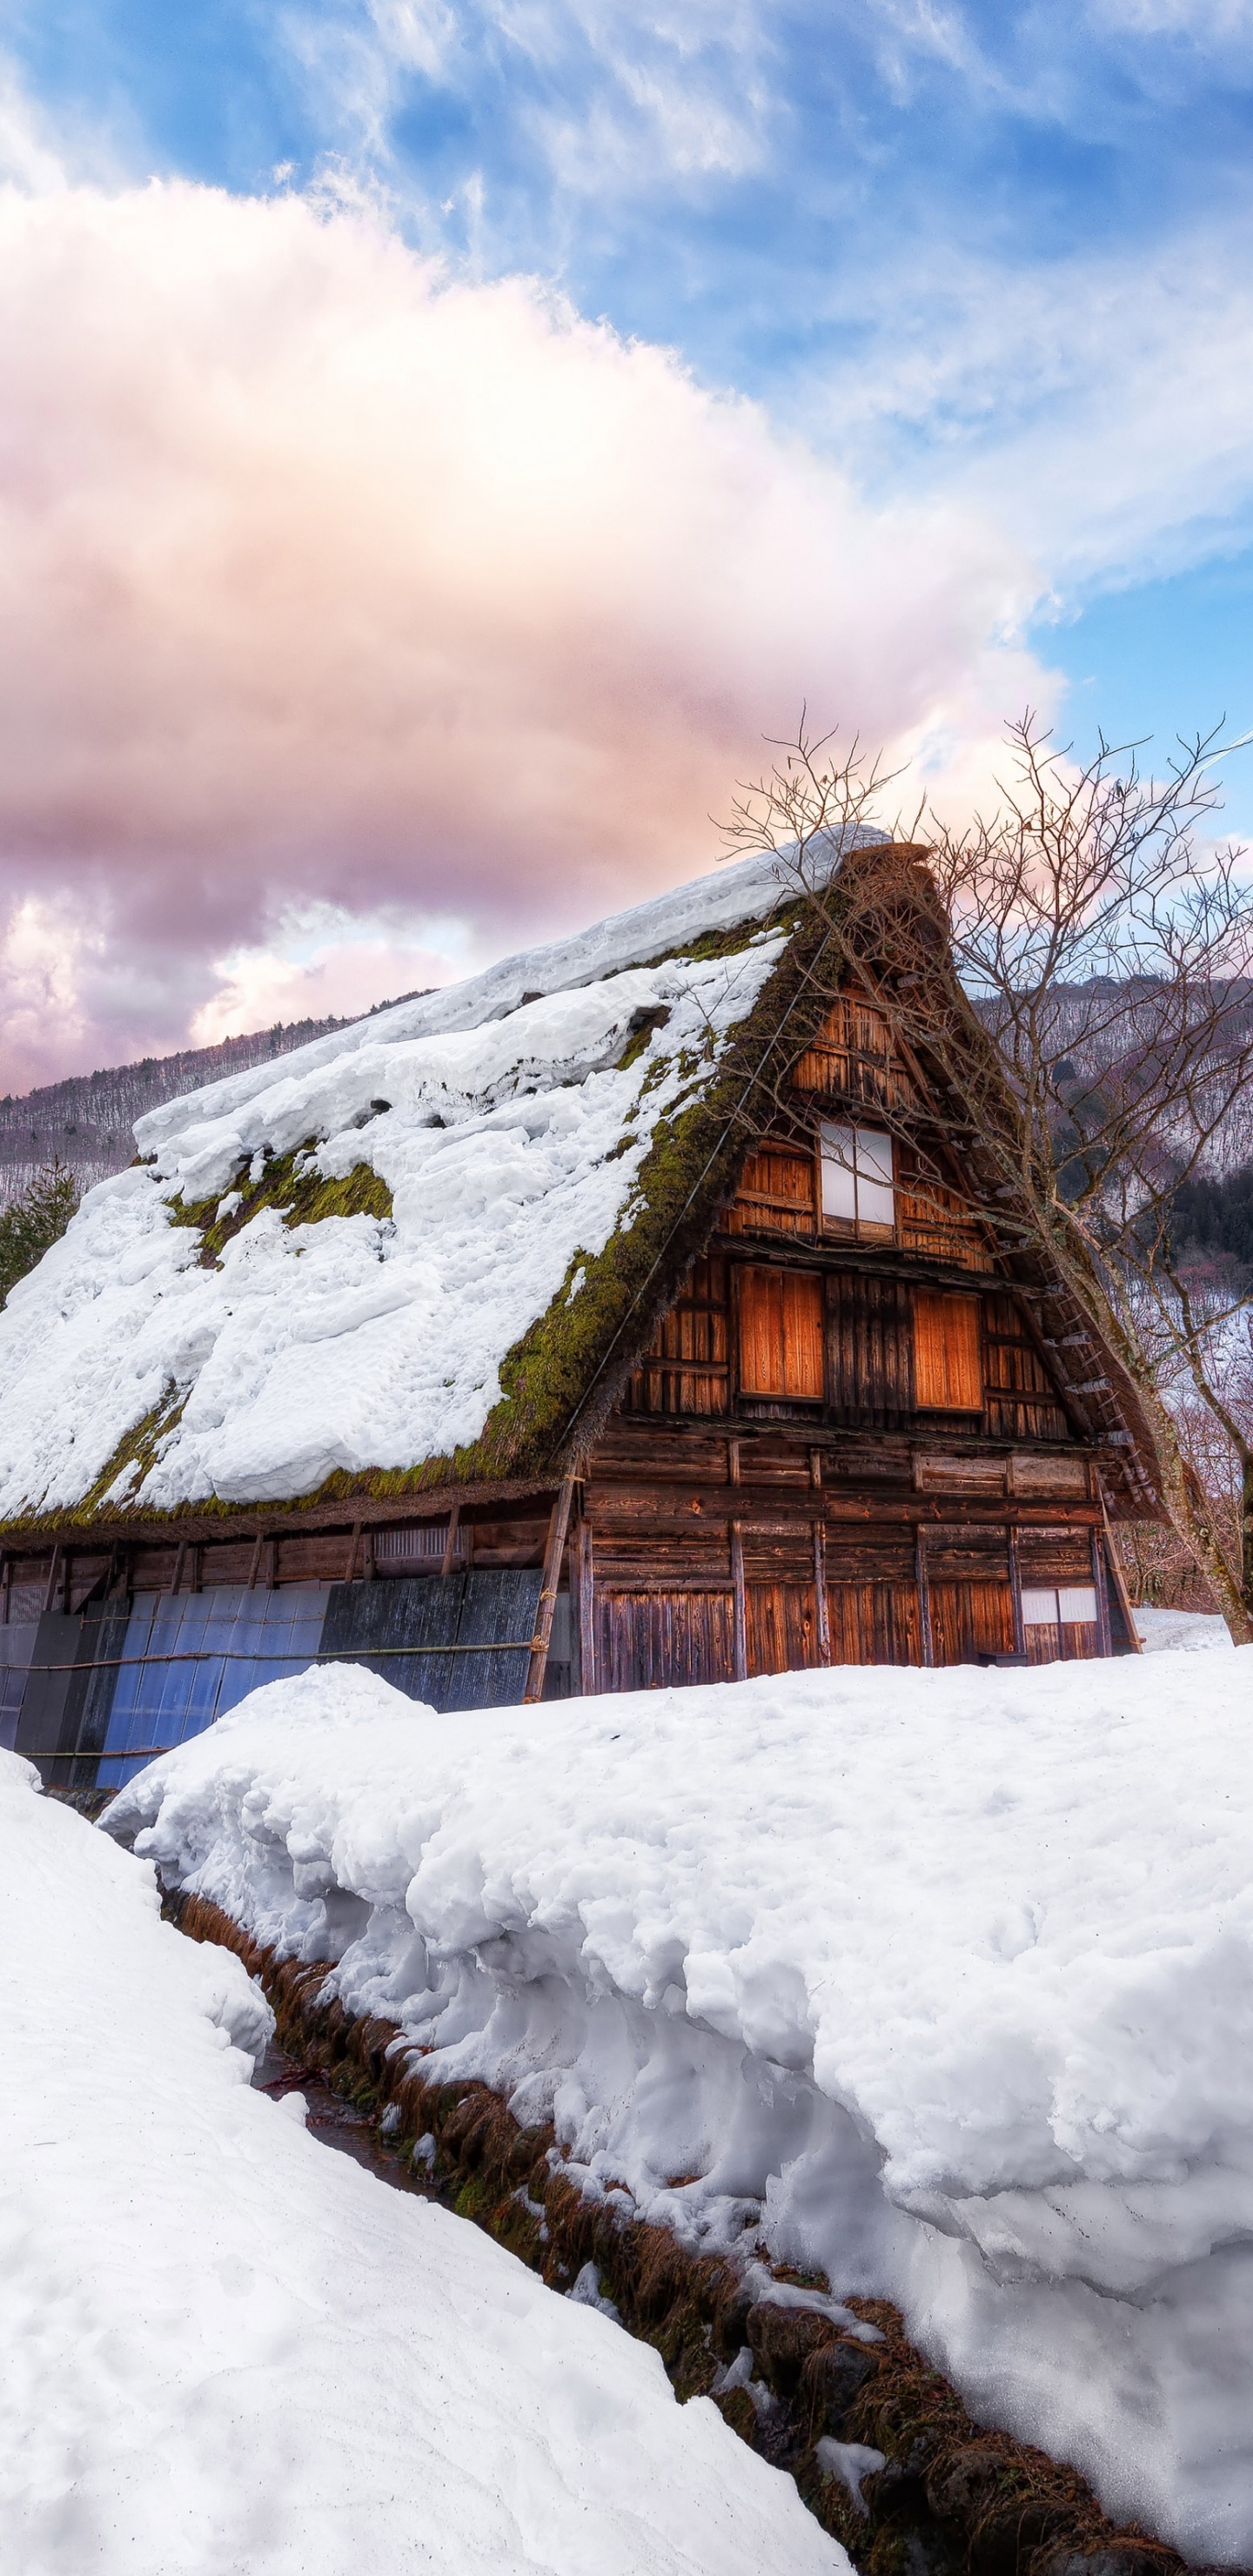 Brown Wooden House on Snow Covered Ground Under White Clouds and Blue Sky During Daytime. Wallpaper in 1440x2960 Resolution